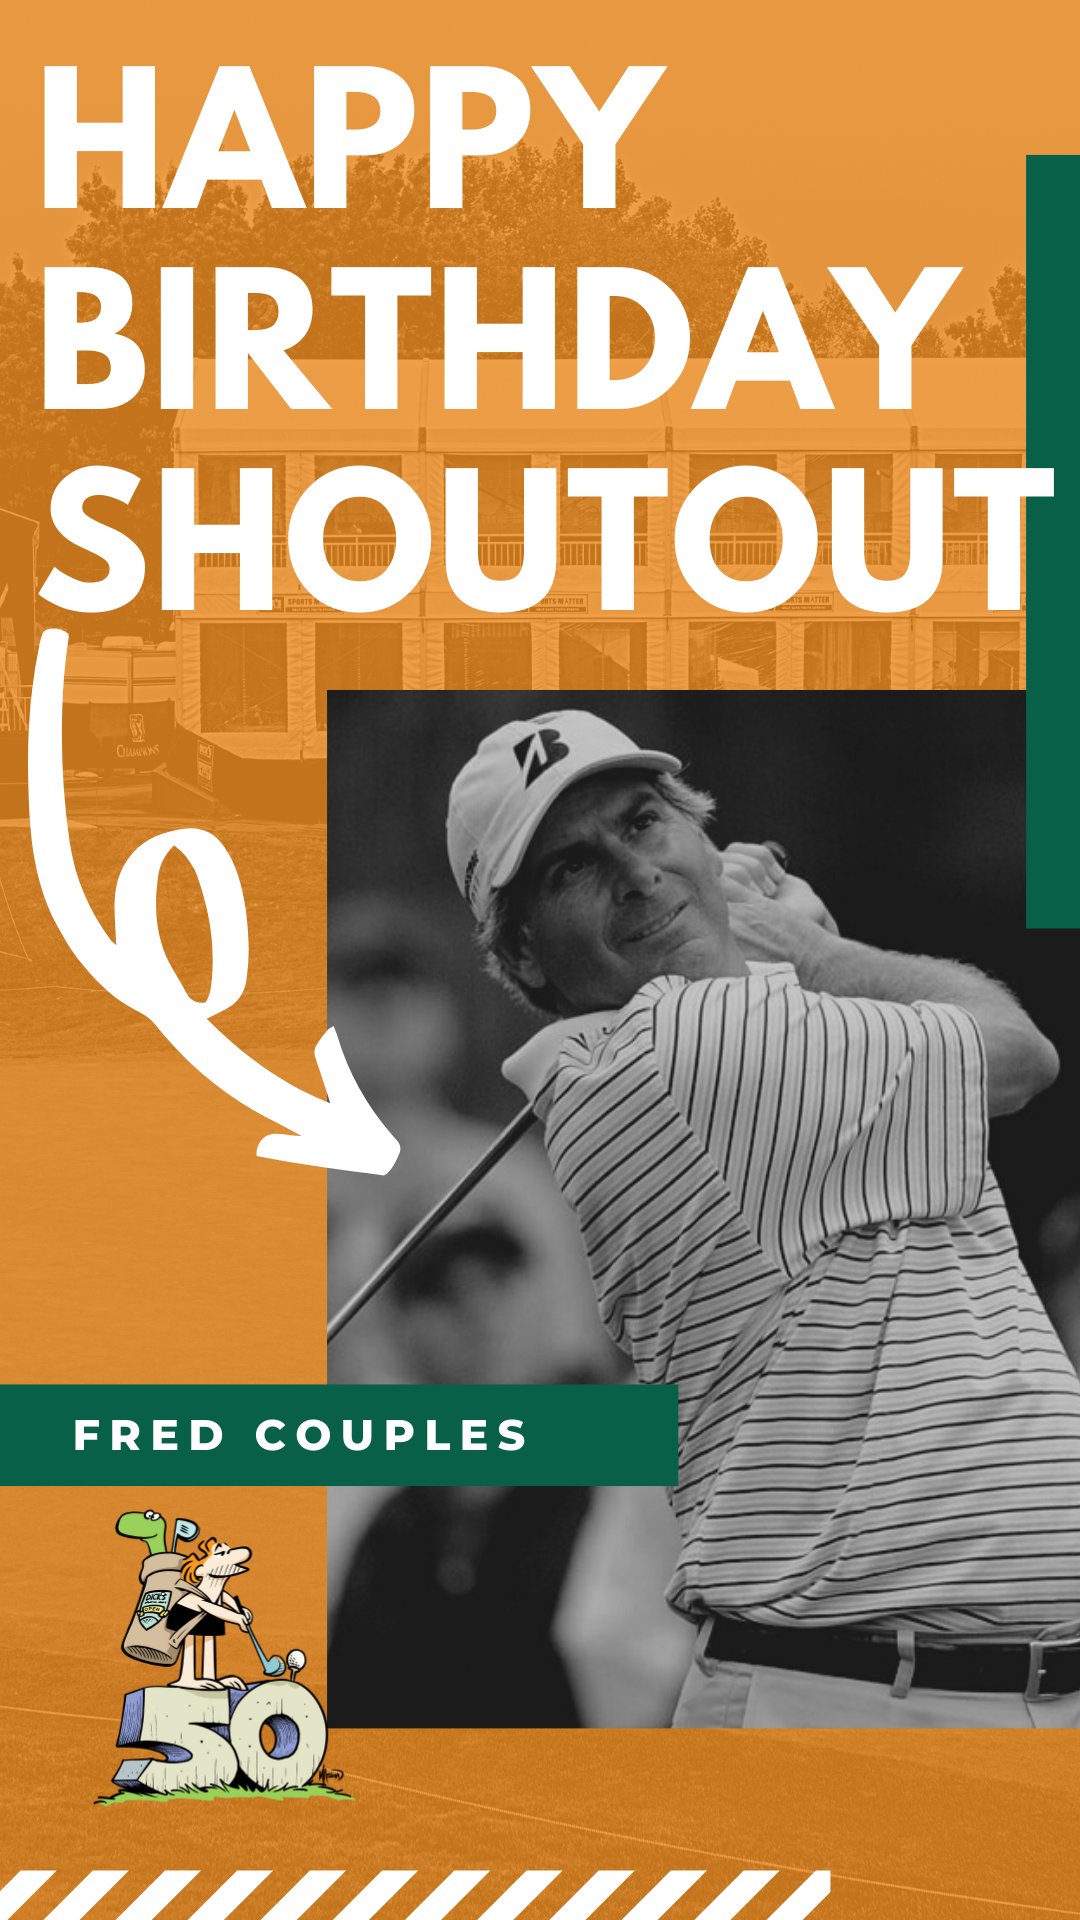 Happy Birthday to Fred Couples! 